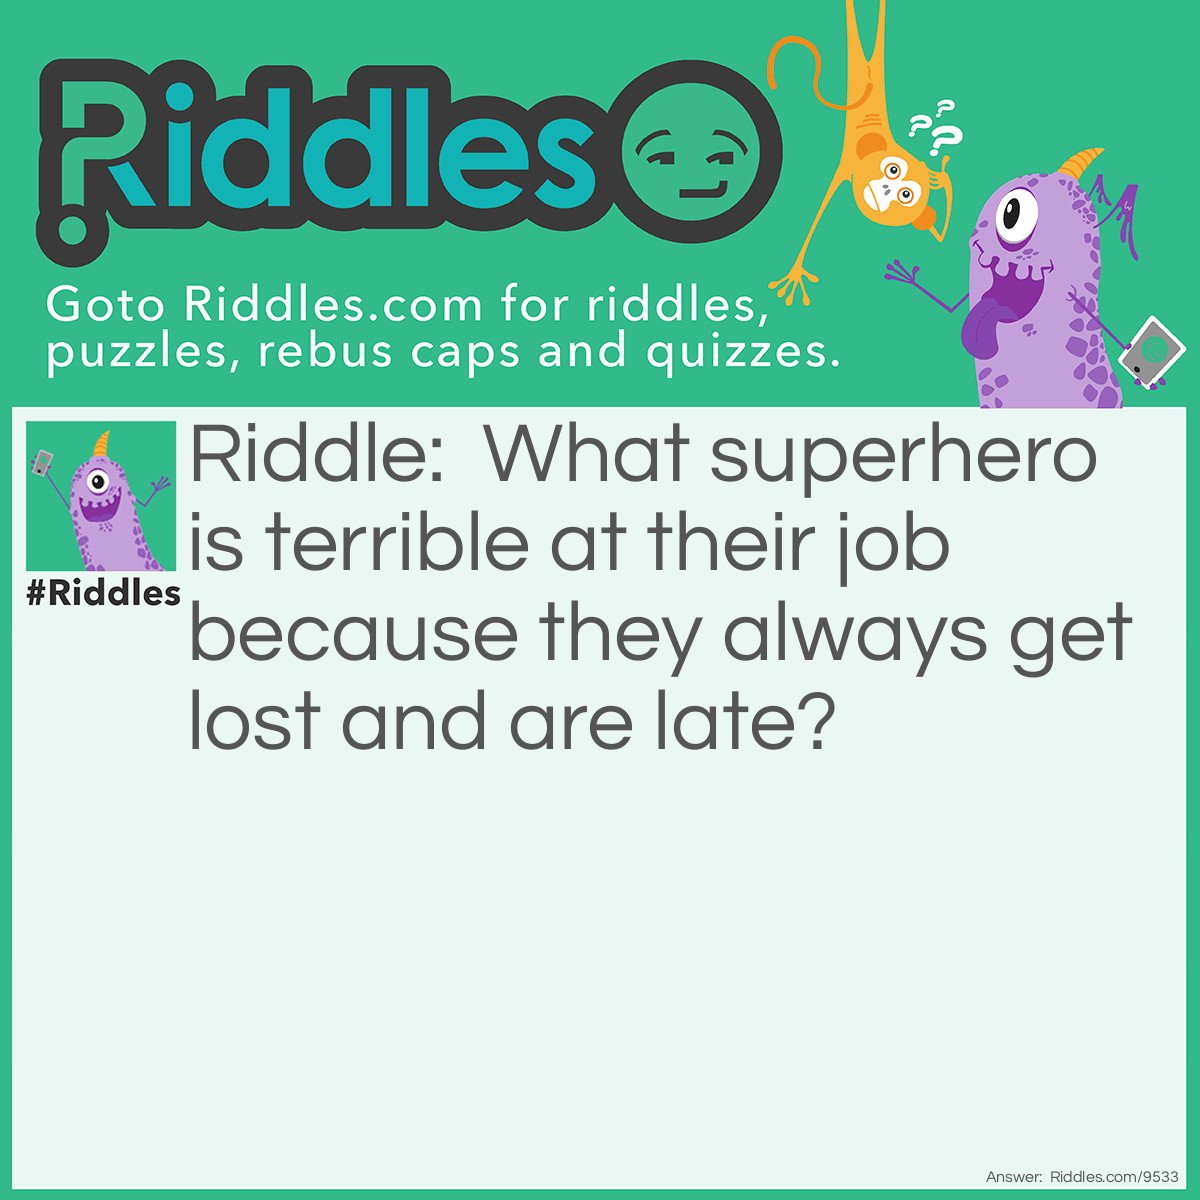 Riddle: What superhero is terrible at their job because they always get lost and are late? Answer: Wander woman.